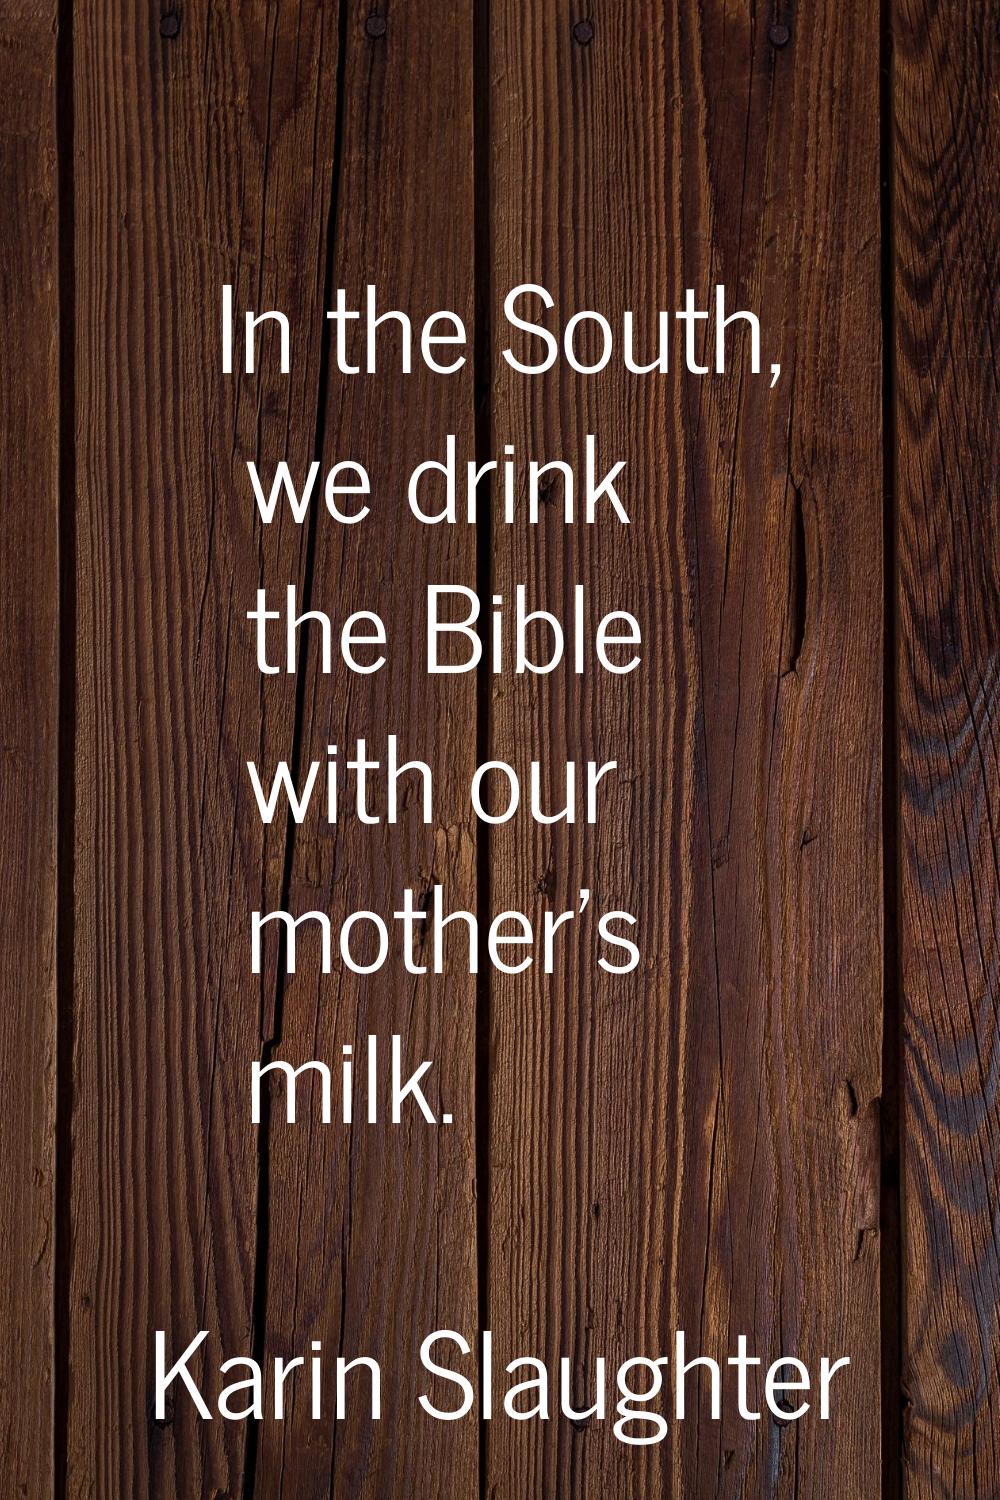 In the South, we drink the Bible with our mother's milk.